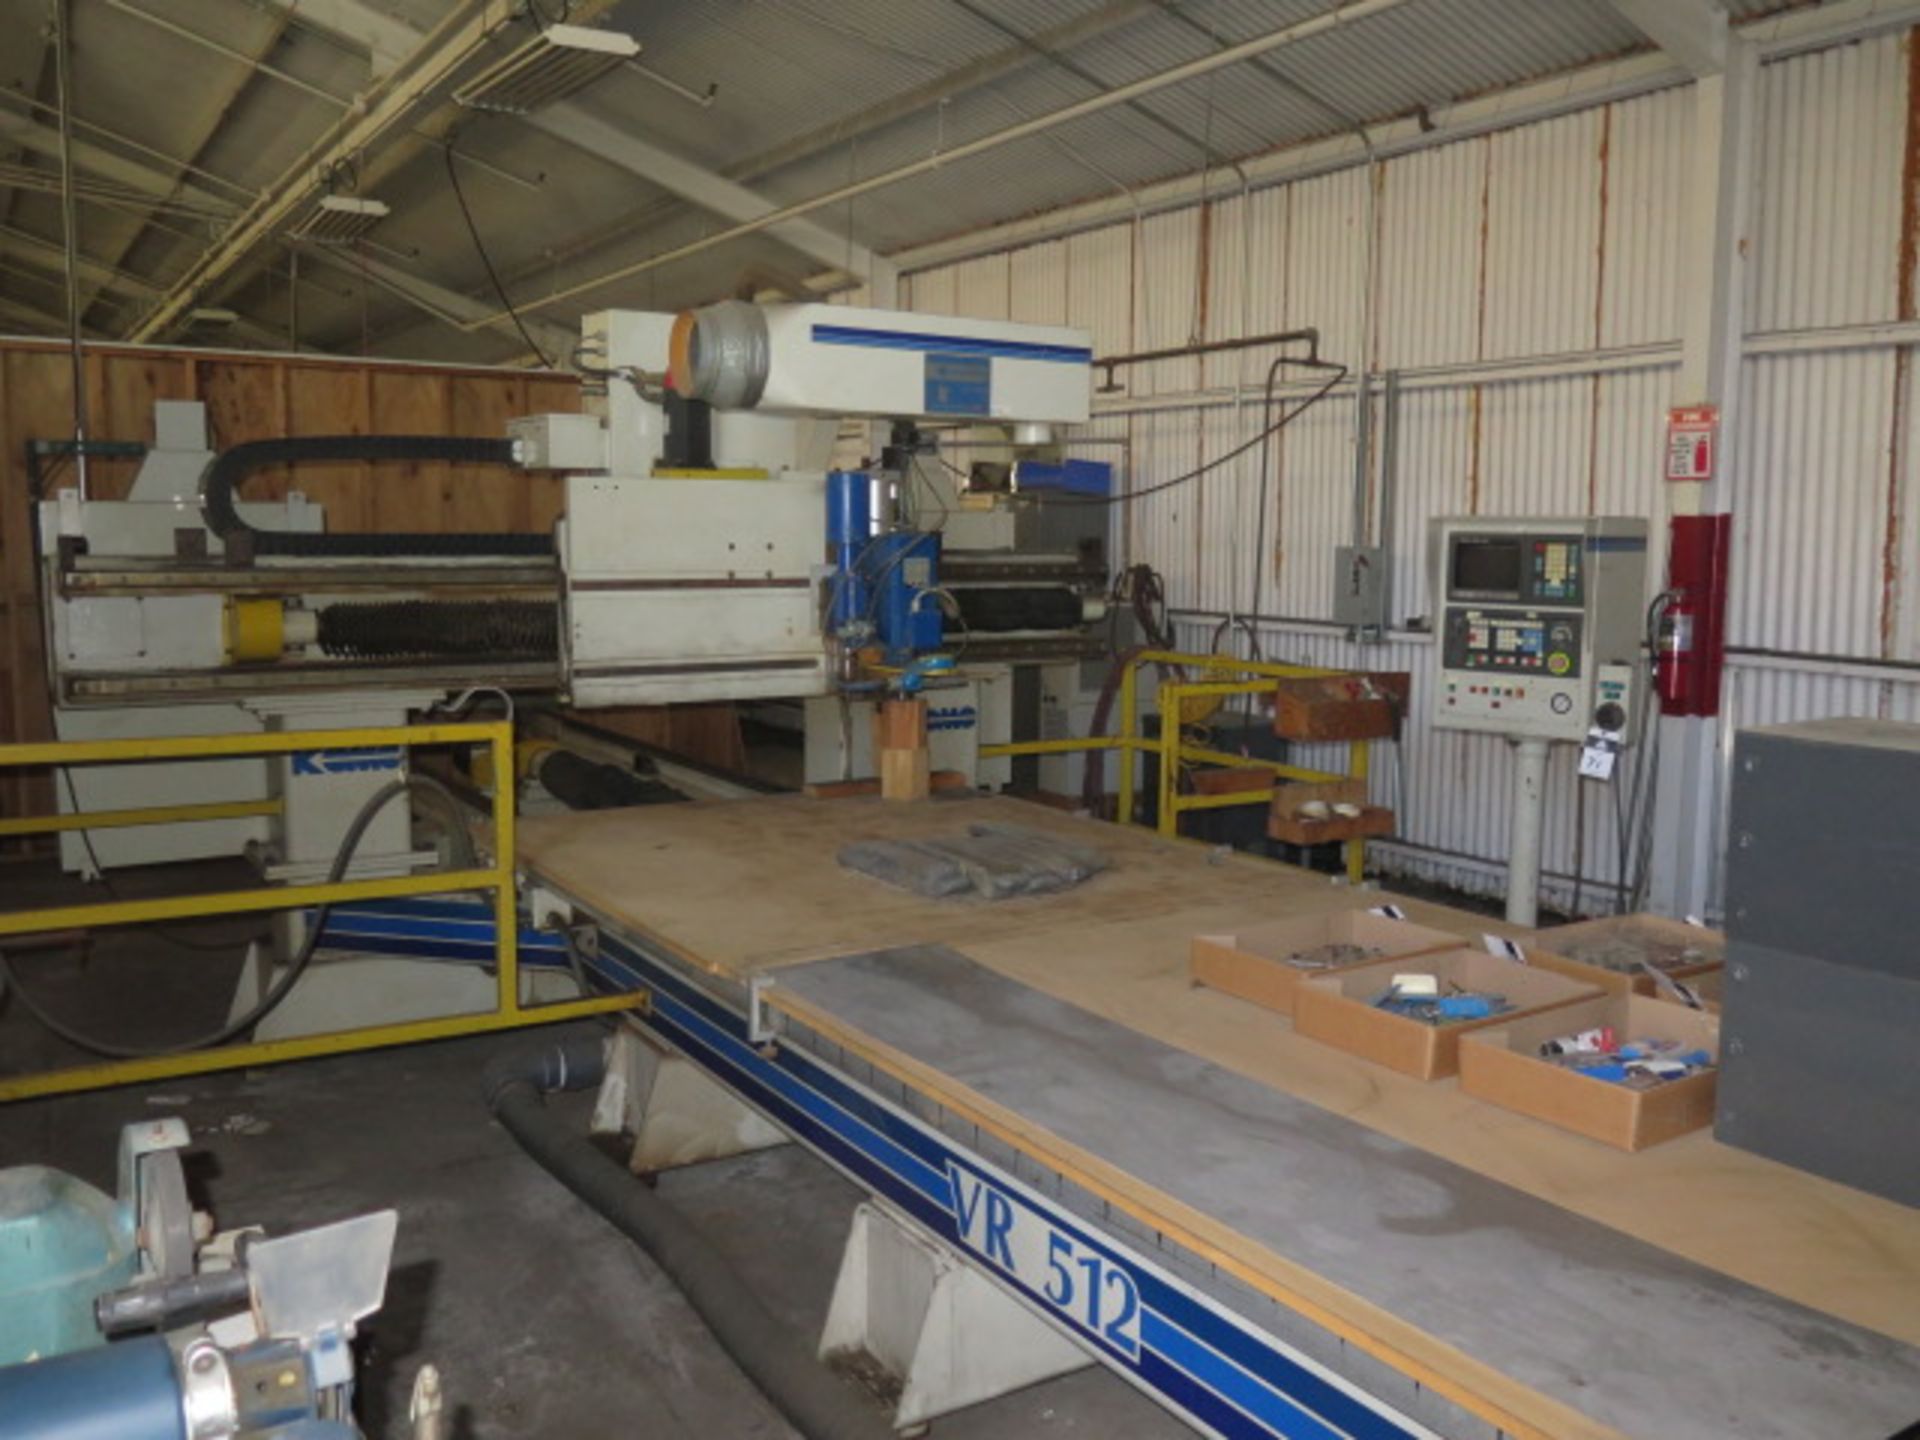 1994 Komo mdl. VR512 5’ x 12’ CNC Router s/n 1316594 w/ Fanuc Series 0-M Controls, SOLD AS IS